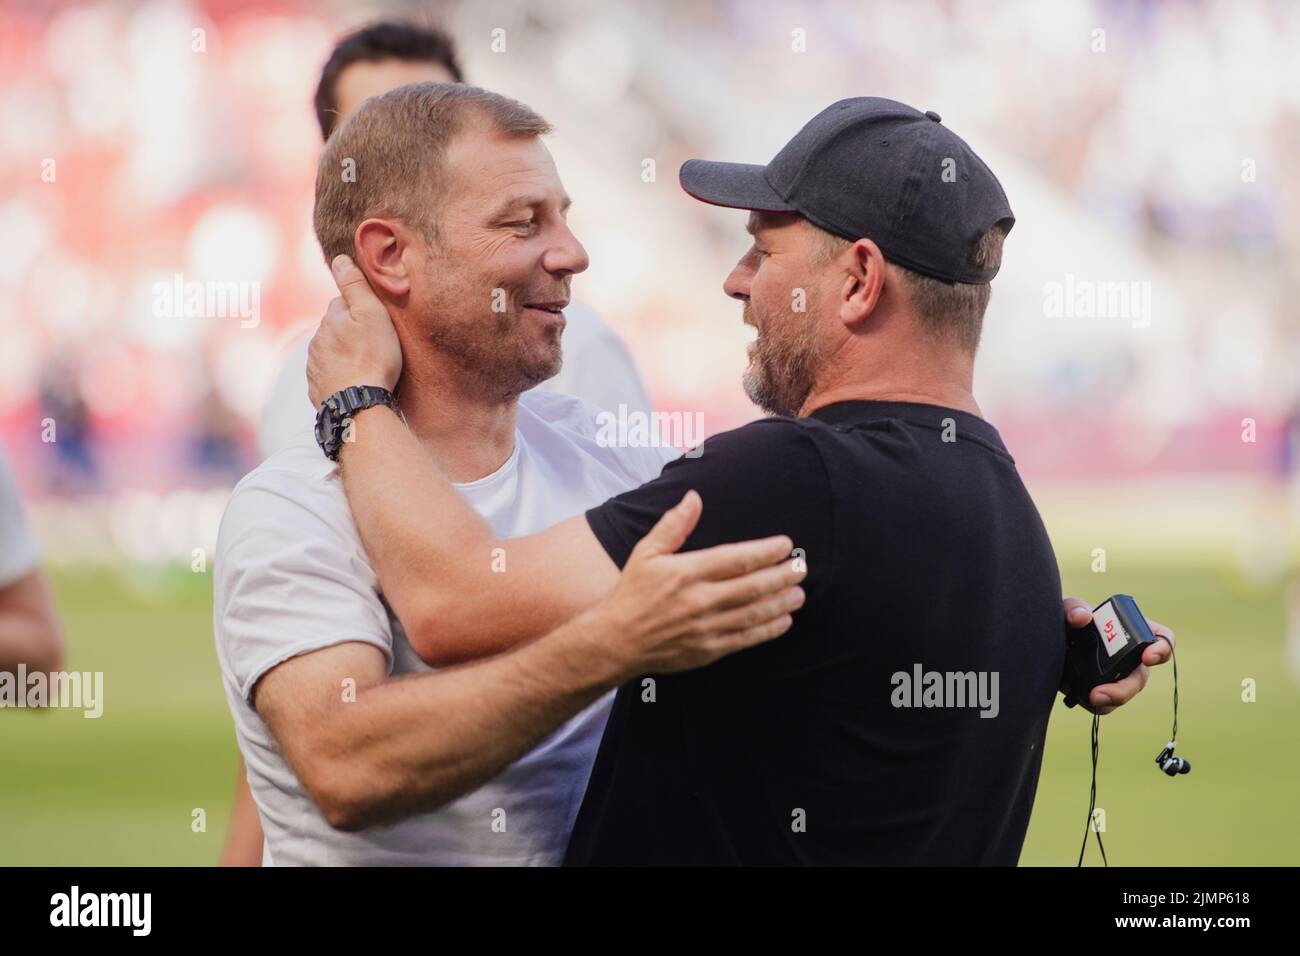 07 August 2022, North Rhine-Westphalia, Cologne: Soccer: Bundesliga, 1st FC Cologne - FC Schalke 04, Matchday 1, RheinEnergieStadion. Schalke coach Frank Kramer (l) and Cologne coach Steffen Baumgart embrace before the game. Photo: Marius Becker/dpa - IMPORTANT NOTE: In accordance with the requirements of the DFL Deutsche Fußball Liga and the DFB Deutscher Fußball-Bund, it is prohibited to use or have used photographs taken in the stadium and/or of the match in the form of sequence pictures and/or video-like photo series. Stock Photo